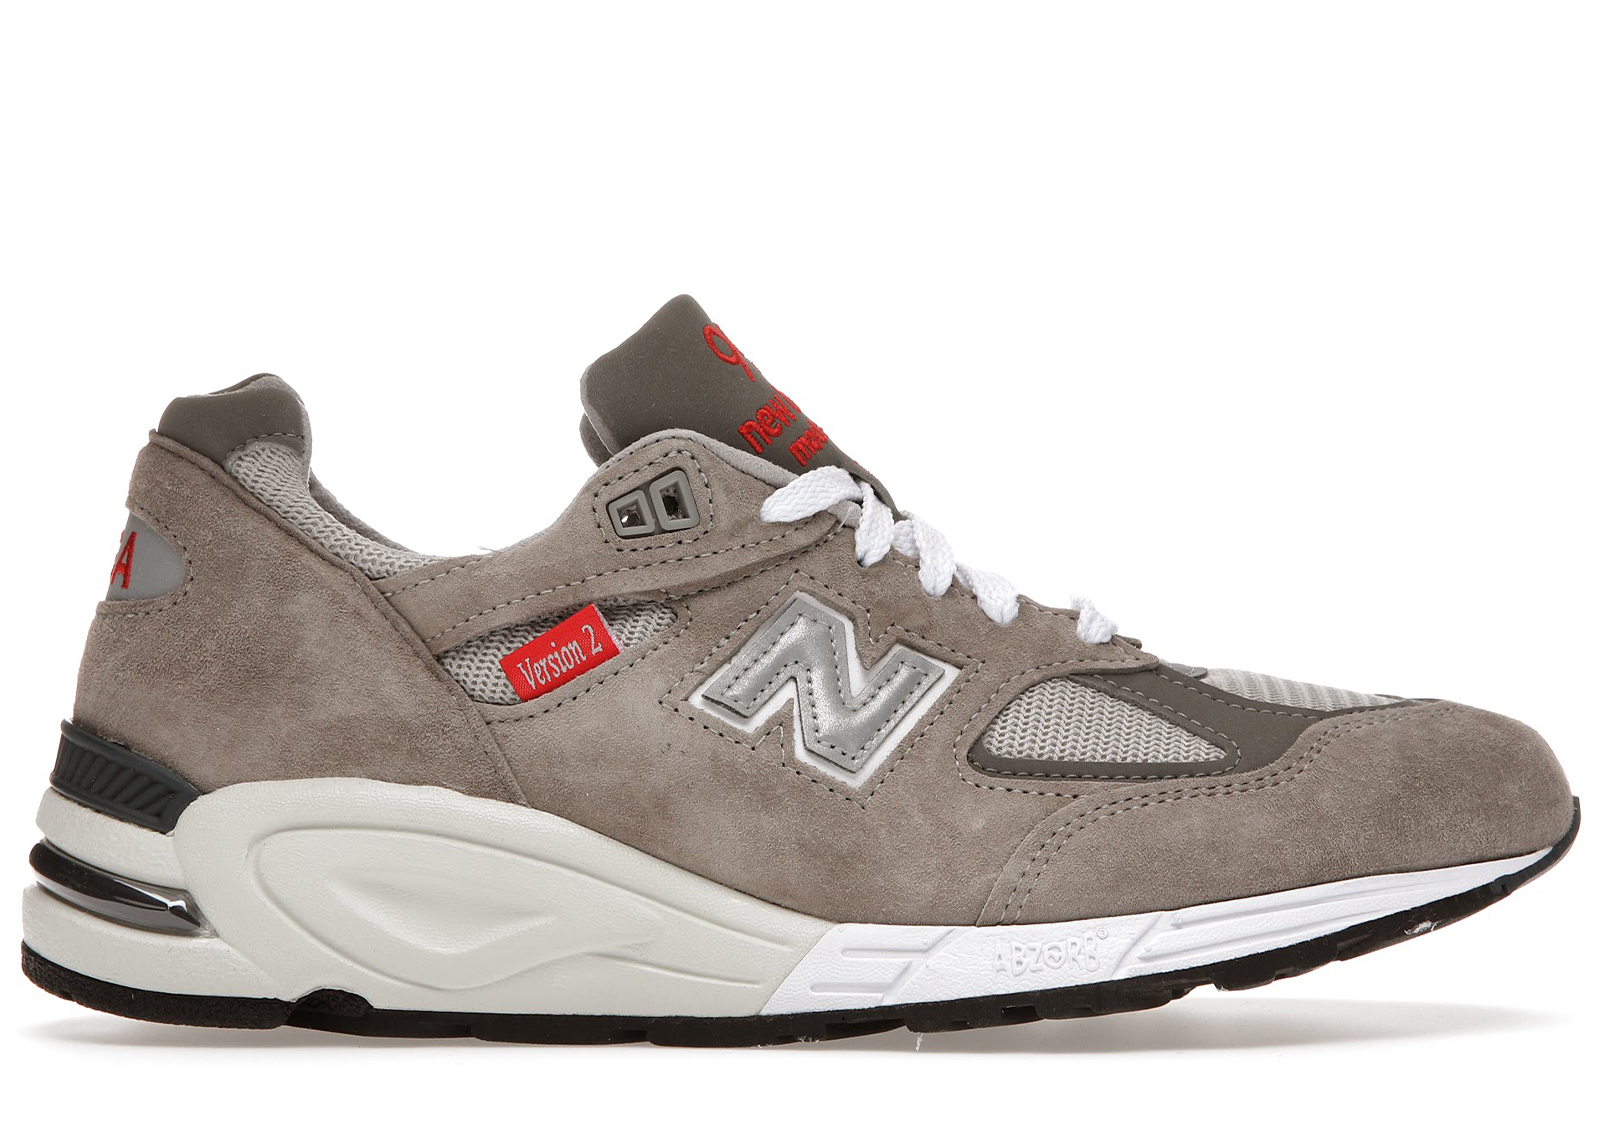 Buy New Balance 990v2 Shoes & Deadstock Sneakers